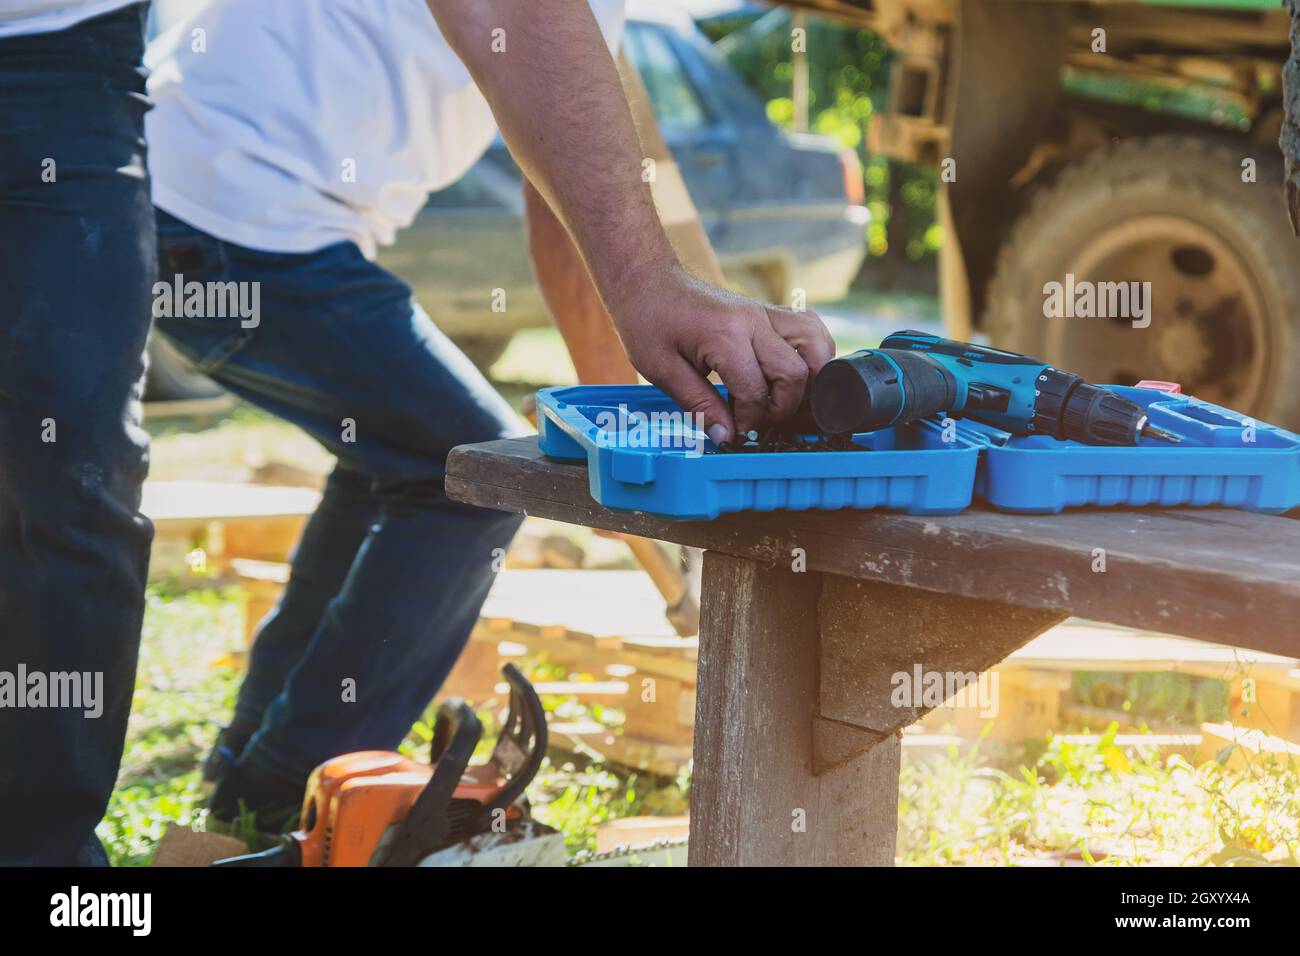 Man uses a screwdriver in work. Stock Photo